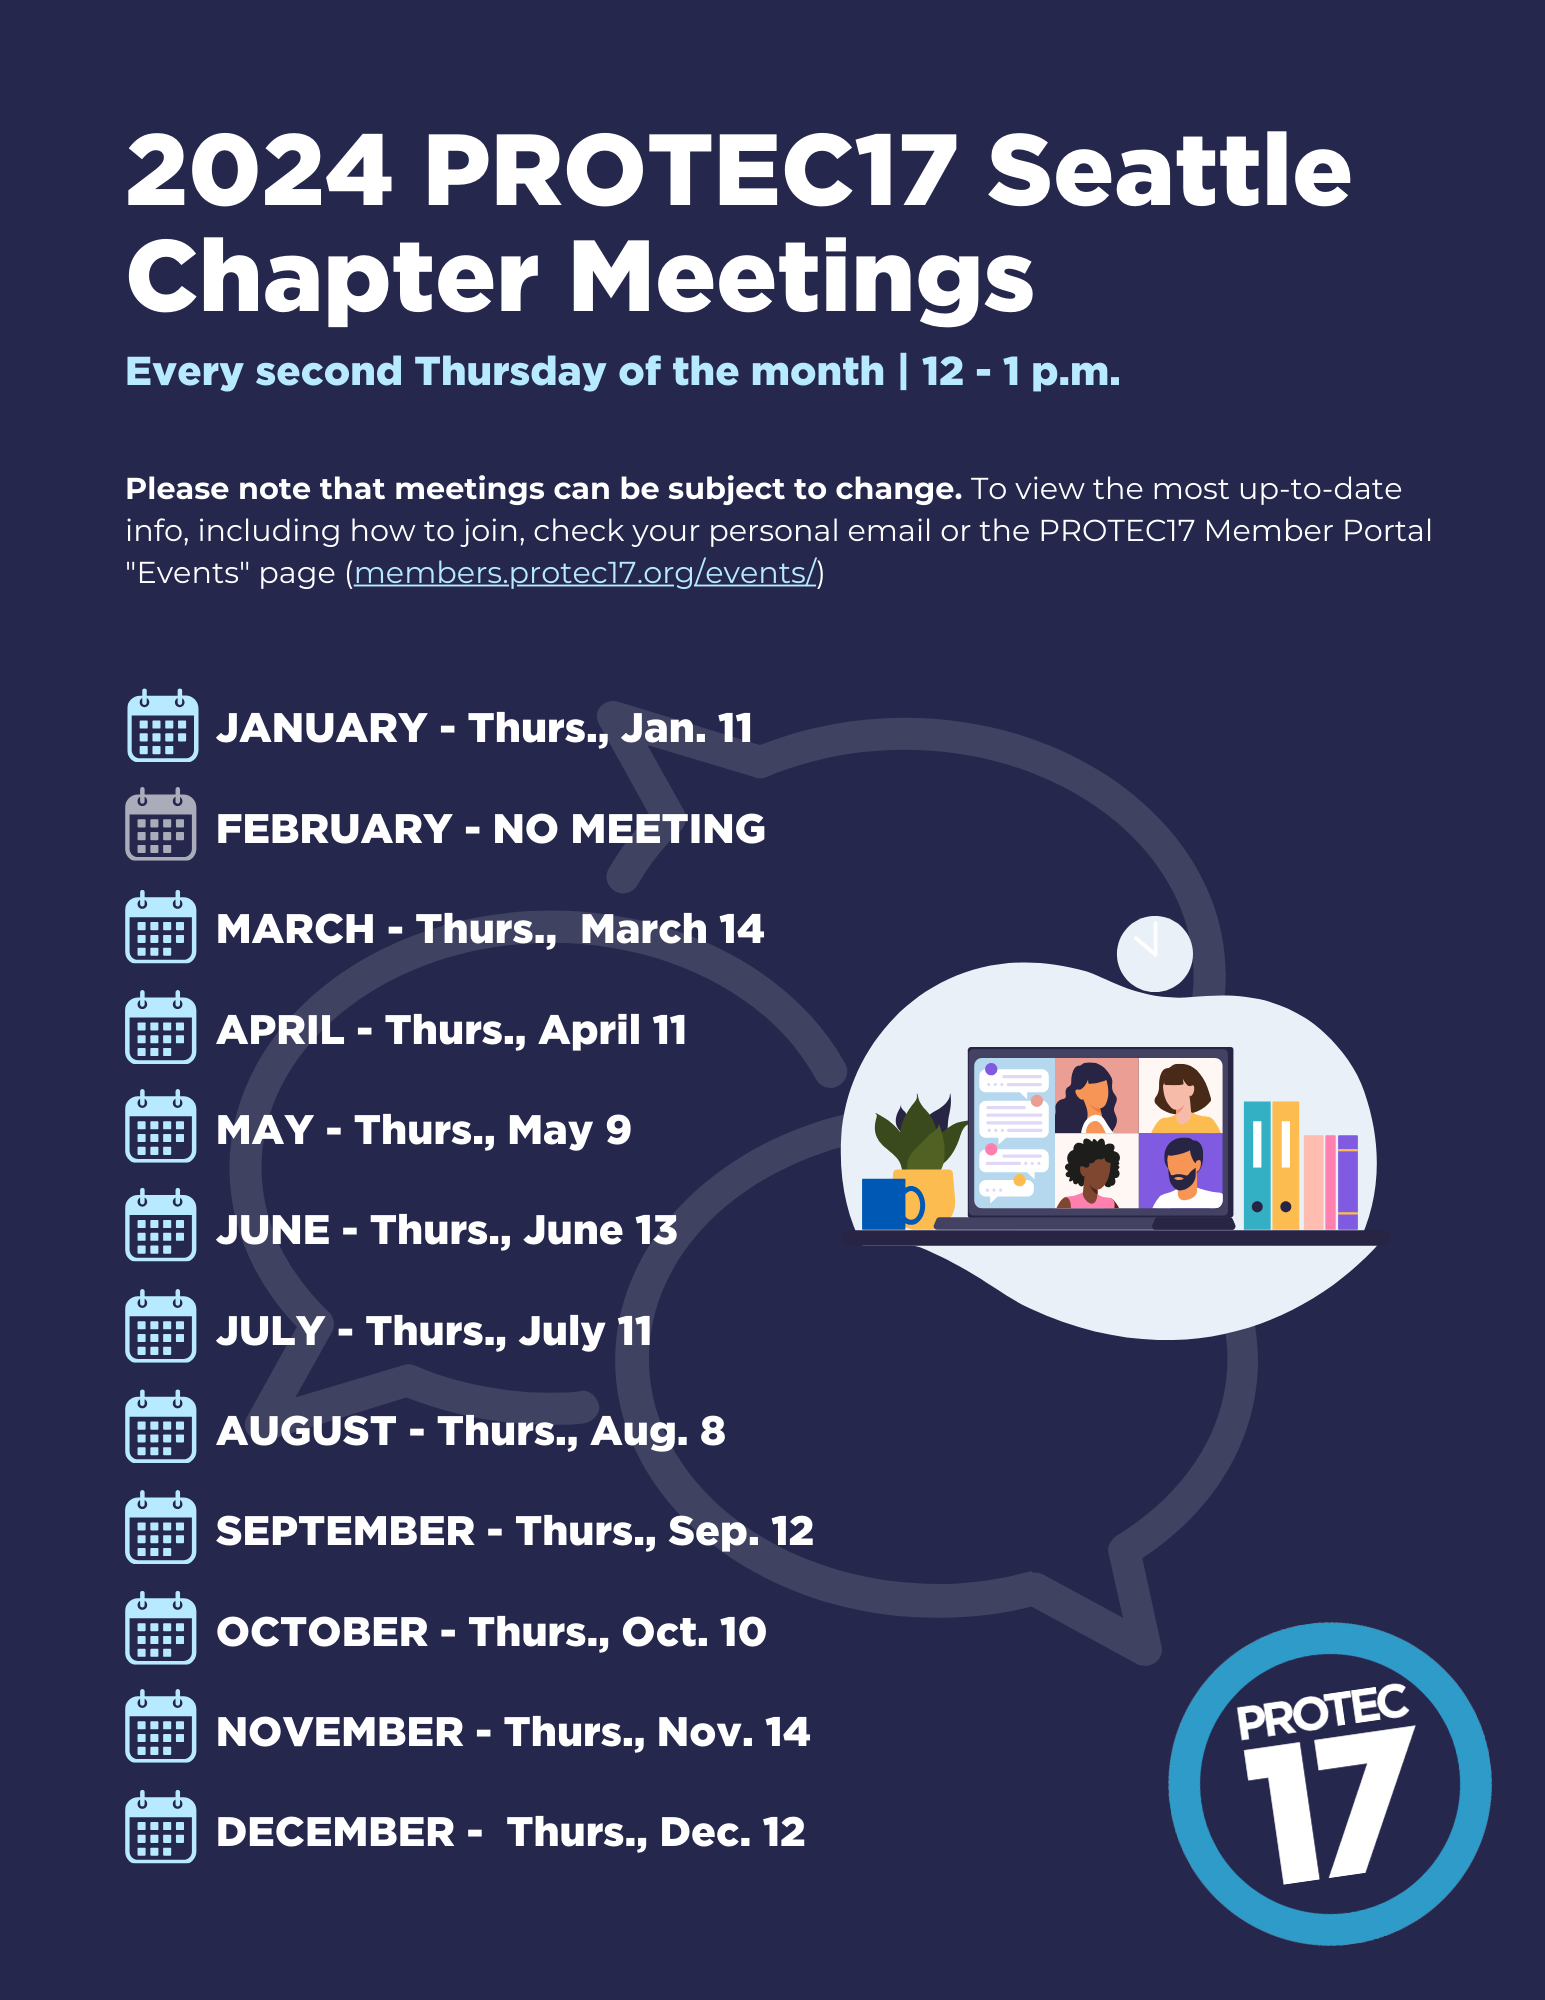 Flyer that reads, "2024 PROTEC17 Seattle Chapter Meetings | Every second Thursday of the month | 12 - 1 p.m. | Please note that meetings can be subject to change. To view the most up-to-date info, including how to join, check your personal email or the PROTEC17 Member Portal "Events" page (members.protec17.org/events/) | JANUARY - Thurs., Jan. 11 | FEBRUARY - NO MEETING | MARCH - Thurs., March 14 | APRIL - Thurs., April 11 | MAY - Thurs., May 9 | JUNE - Thurs., June 13 | JULY - Thurs., July 11 | AUGUST - Thurs., Aug. 8 | SEPTEMBER - Thurs., Sep. 12 | OCTOBER - Thurs., Oct. 10 | NOVEMBER - Thurs., Nov. 14 | DECEMBER - Thurs., Dec. 12" There is a colorful graphic of people meeting and the background features a faded simple illustration of chat boxes. The PROTEC17 logo is in the bottom right.